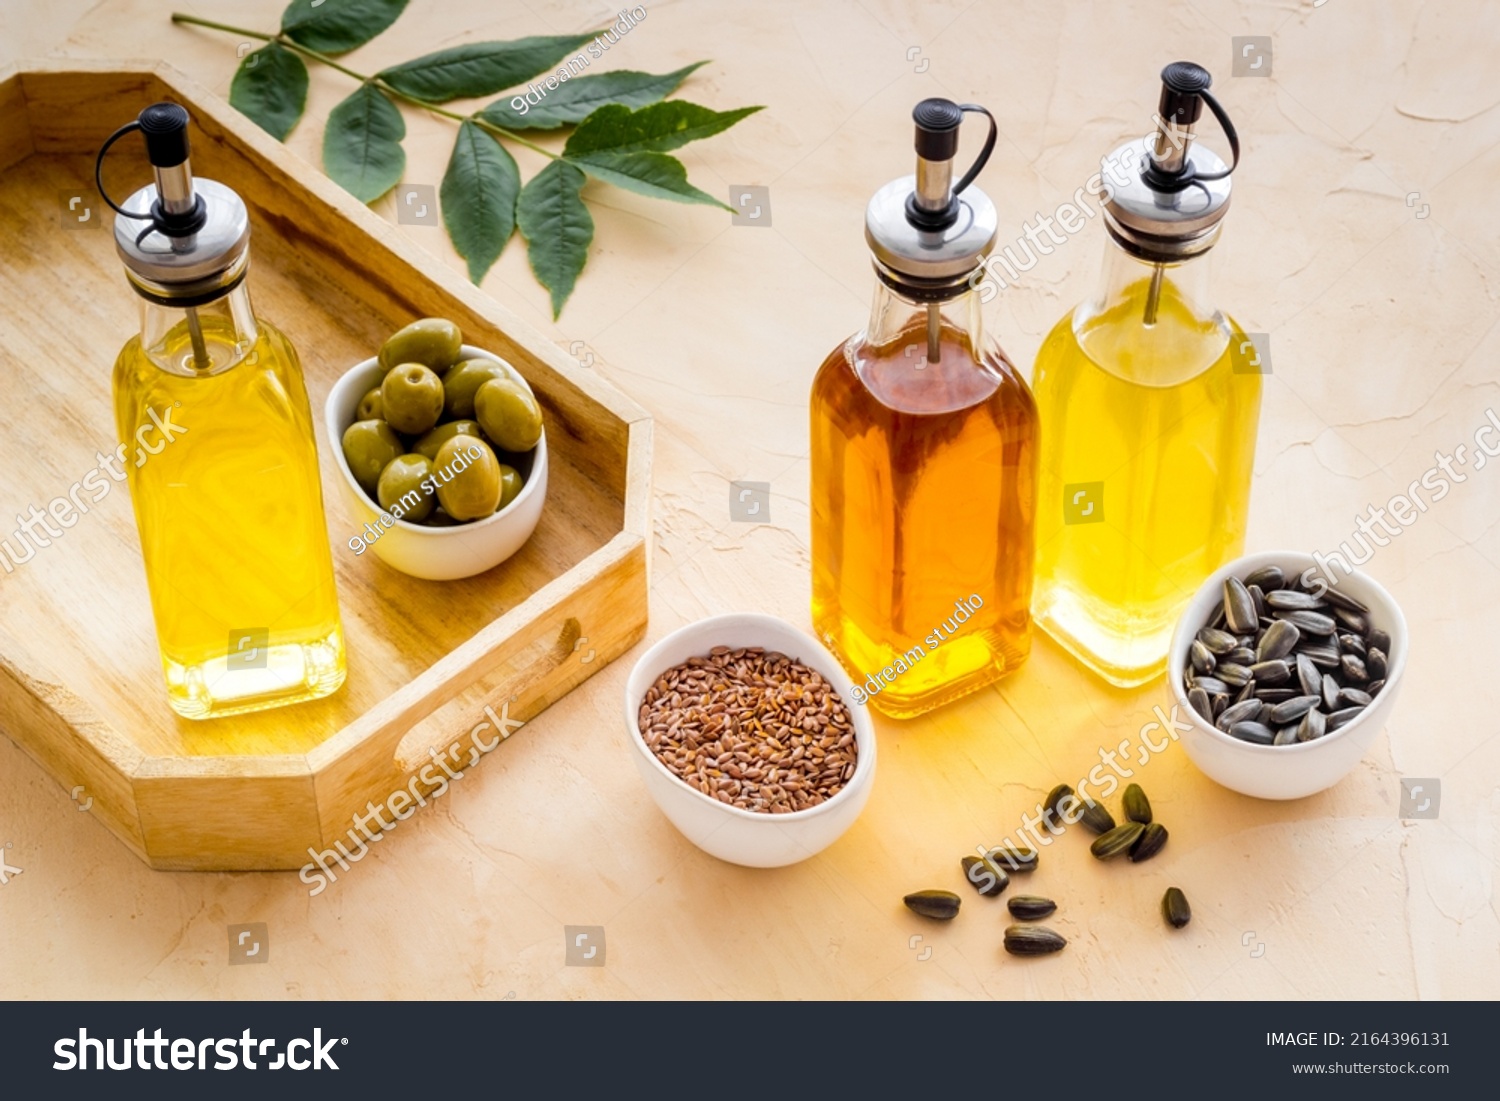 Three types of cooking oil - sunflower olive and sesame oil #2164396131